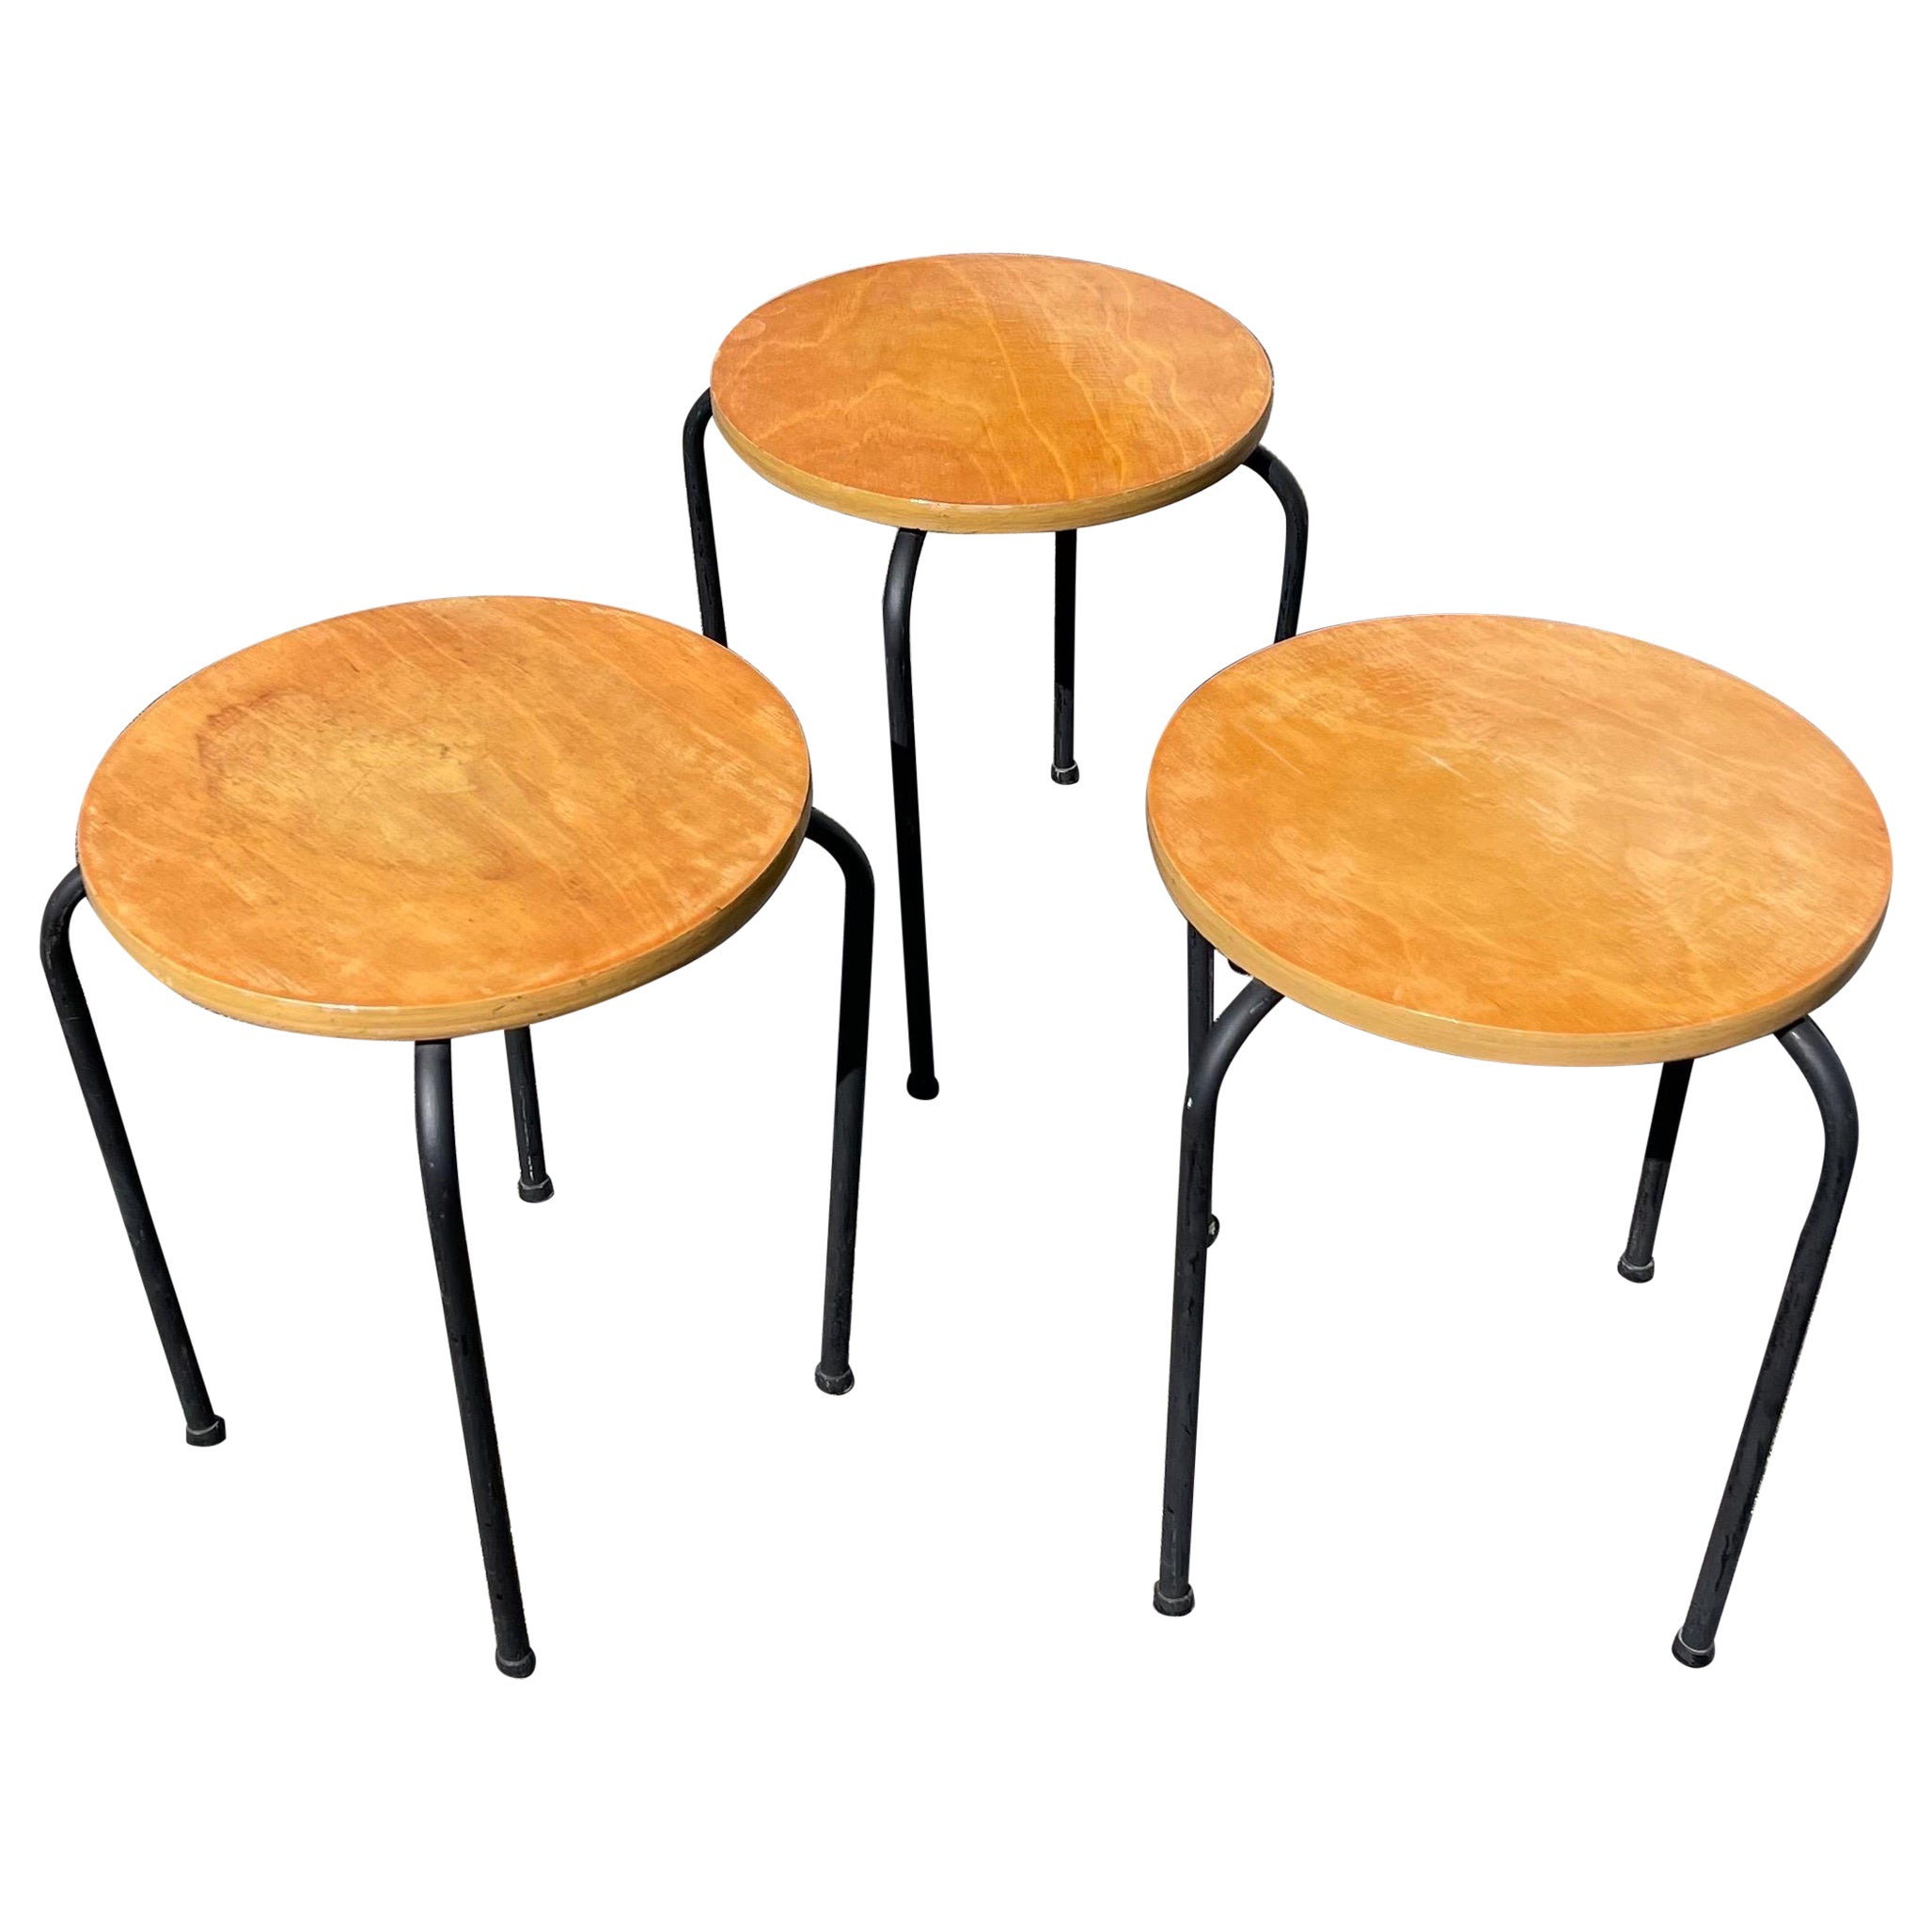 Mid-Century Round Wood Stacking Tables or Stools, Set of 3 For Sale